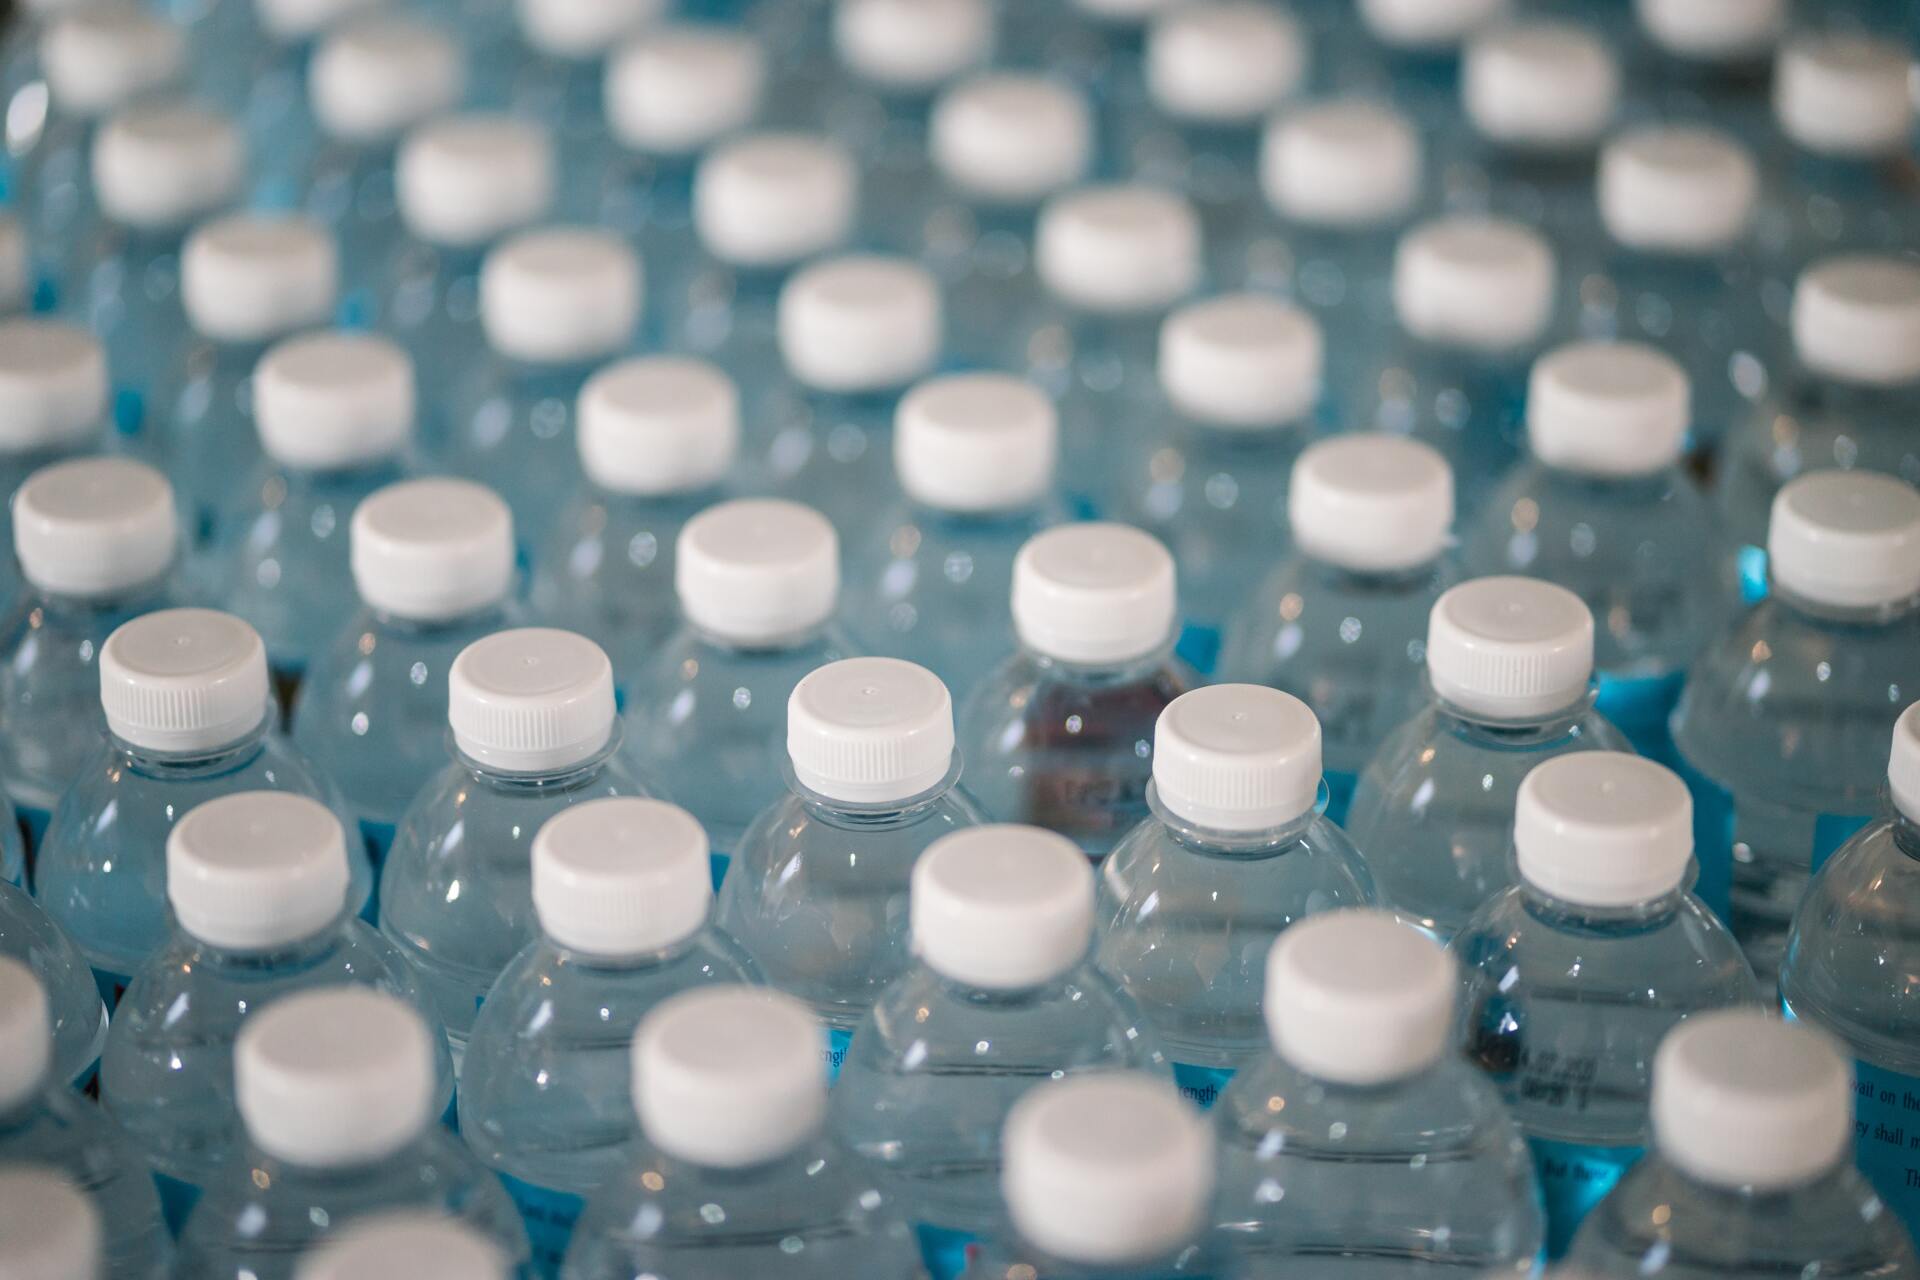 Image of mass-manufactured plastic water bottles.